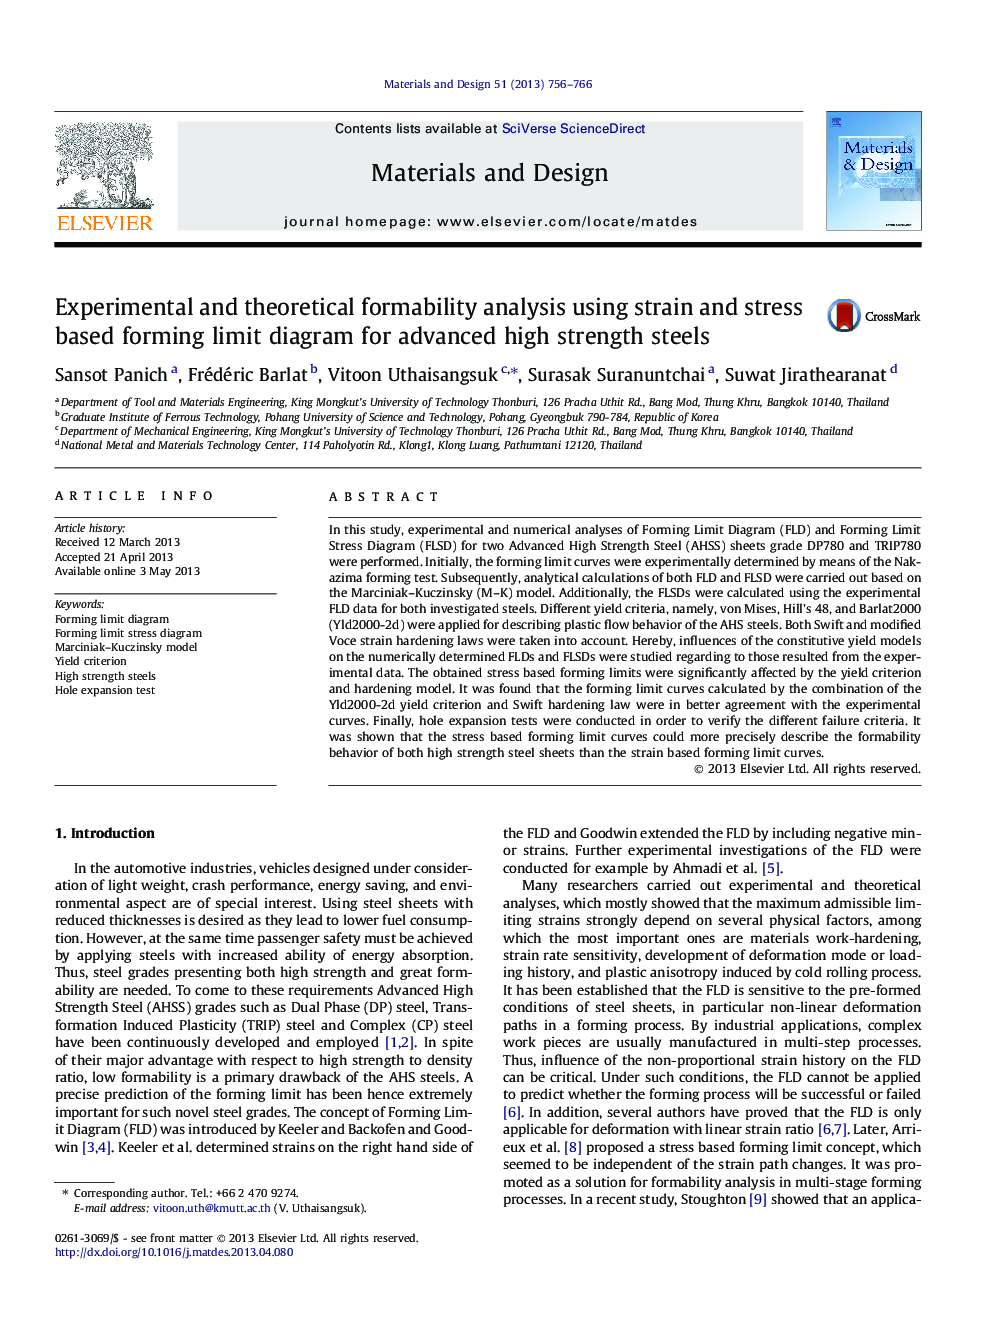 Experimental and theoretical formability analysis using strain and stress based forming limit diagram for advanced high strength steels